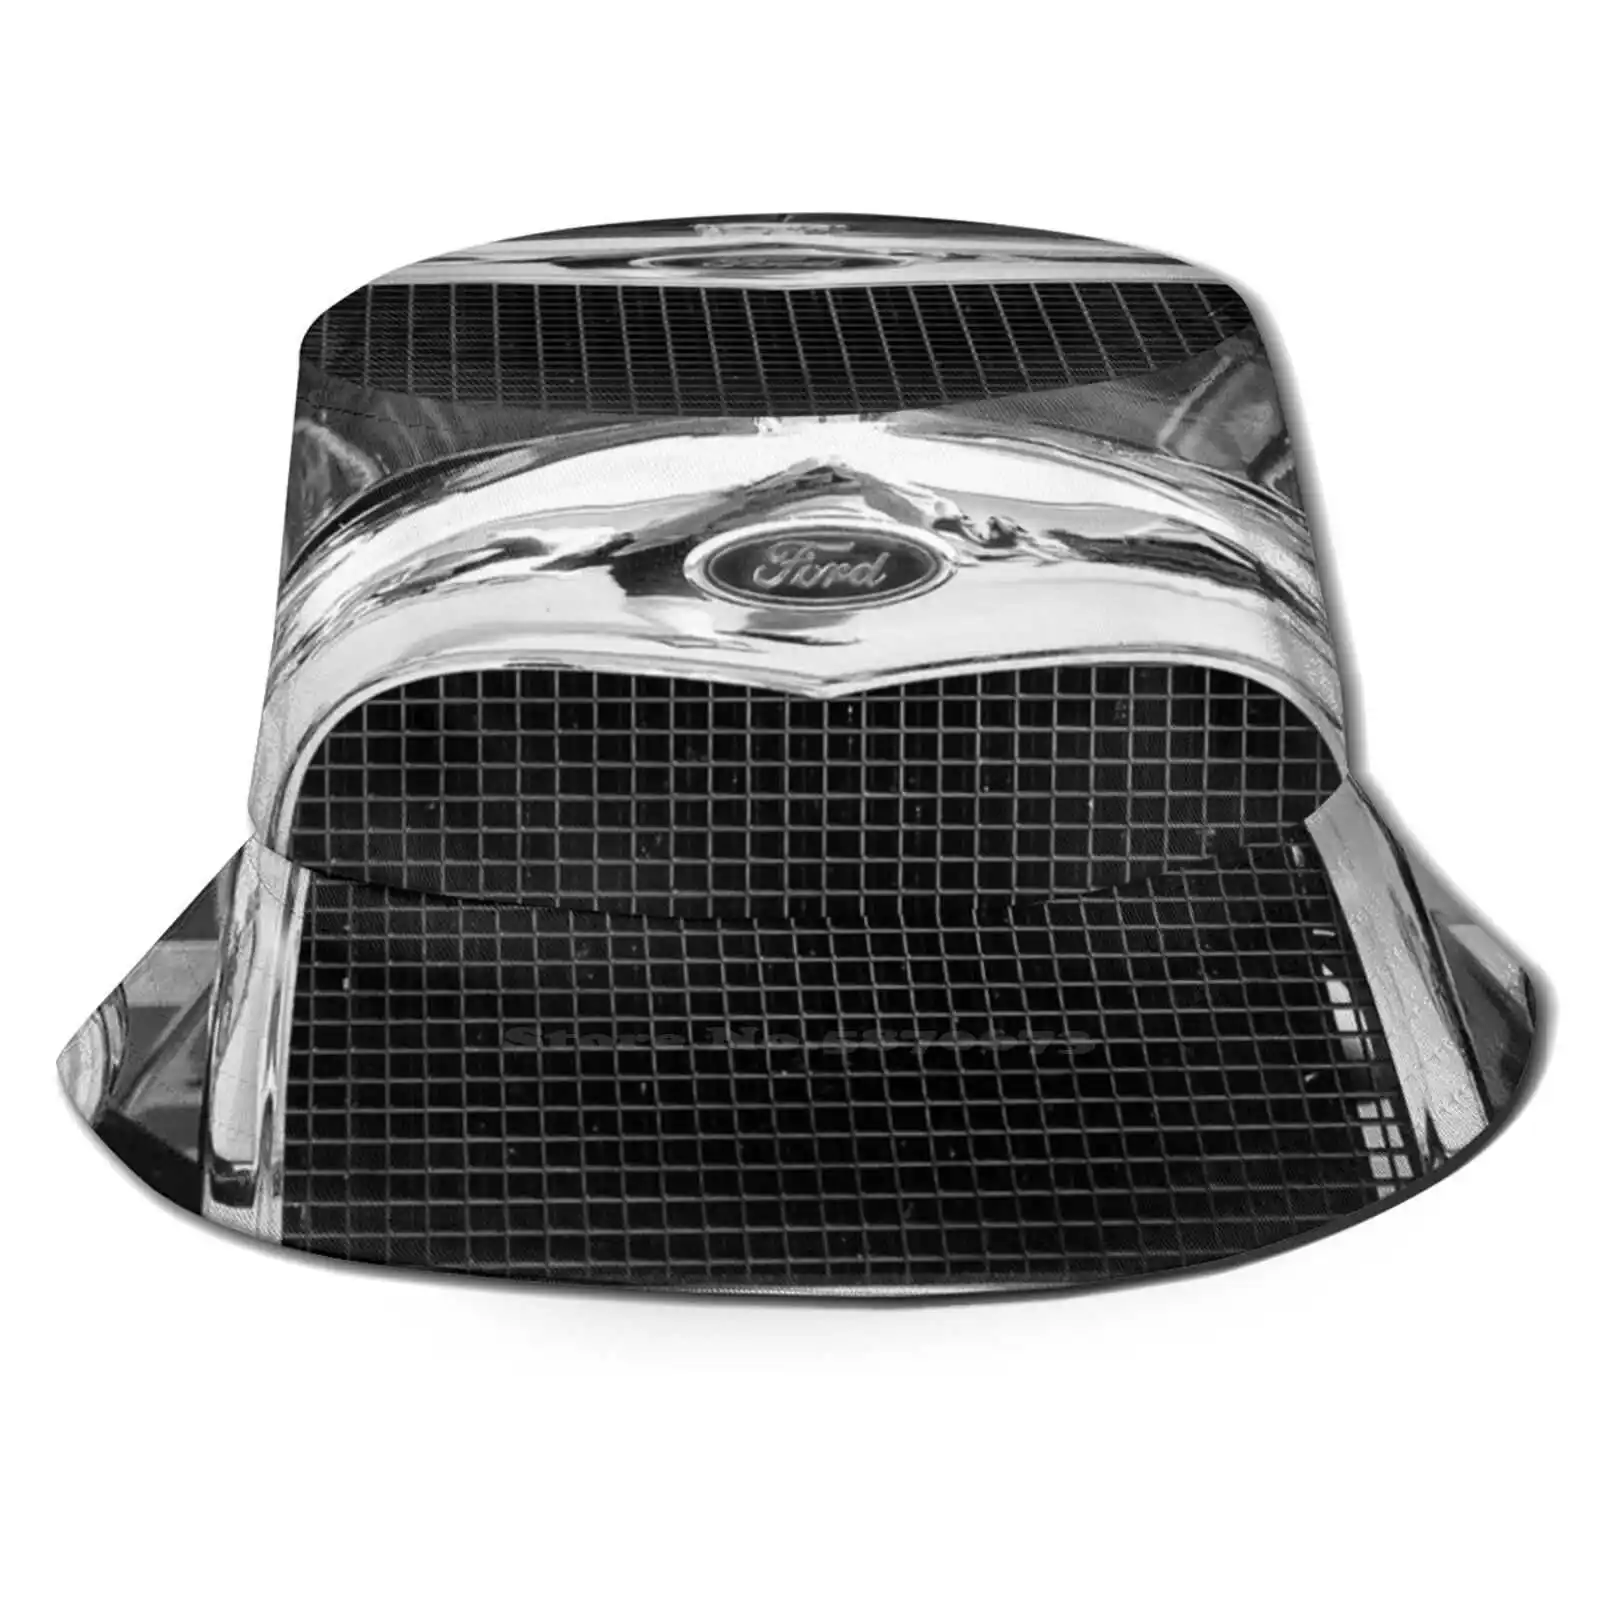 

Vintage Grill Causal Cap Buckets Hat Grill Car Transport Headlights Old Car Monochrome Black And White Label